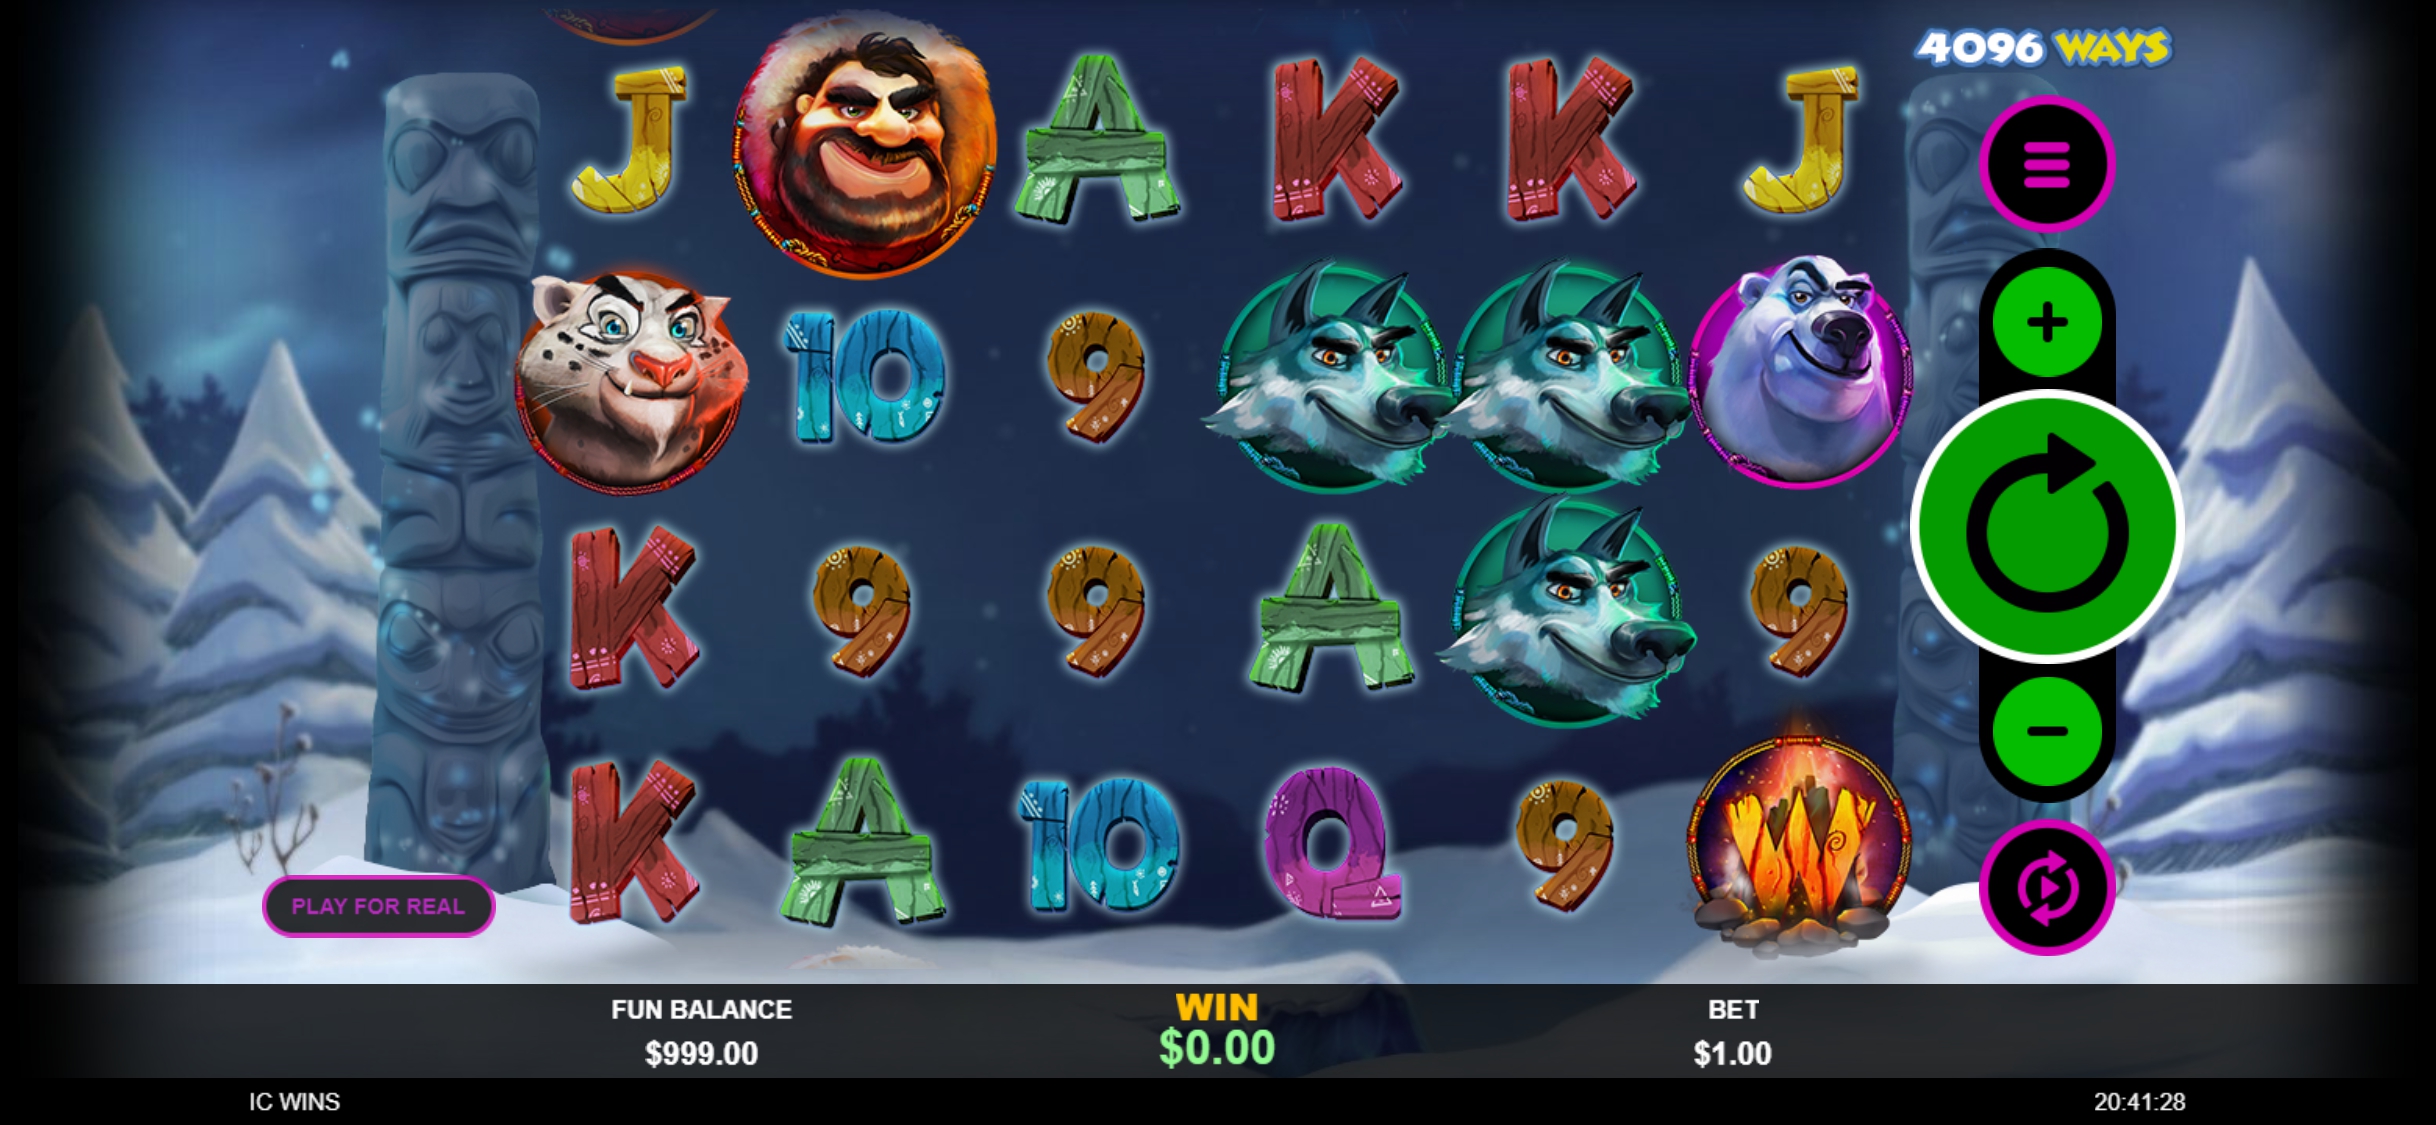 Red Dog Casino Mobile Slot Games Review